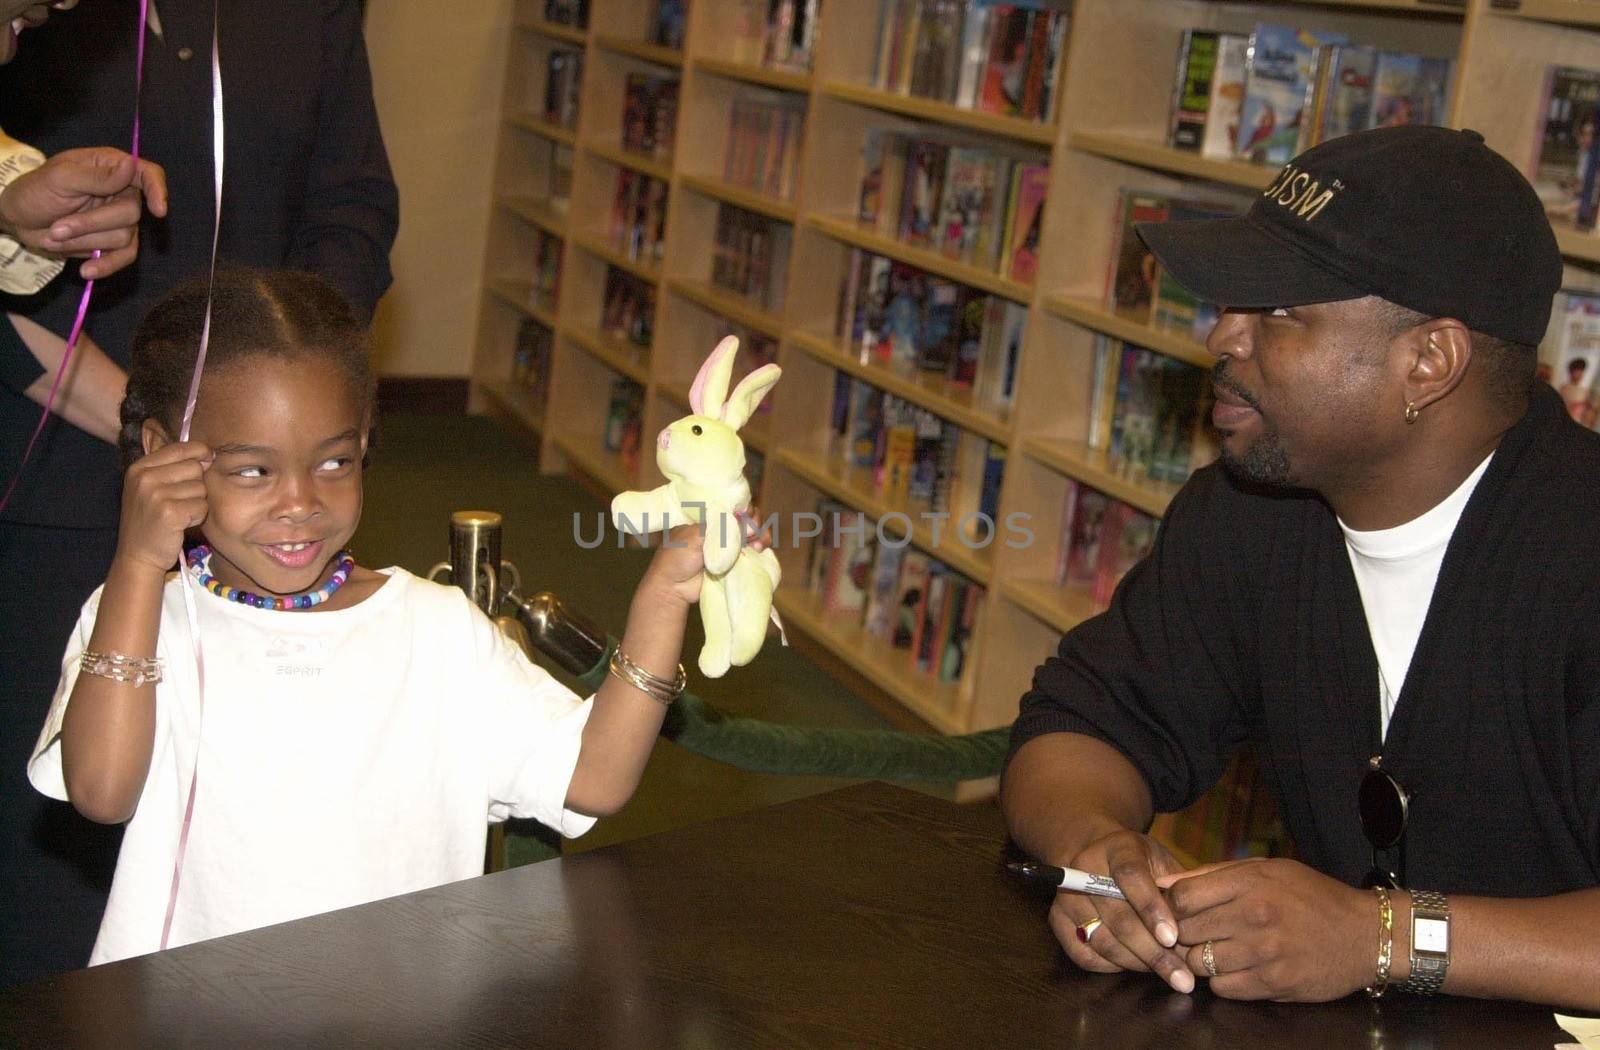 Levar Burton at Barnes and Nobles in Santa Monica to sign copies of his book "Aftermath" and to read to children. 02-19-00